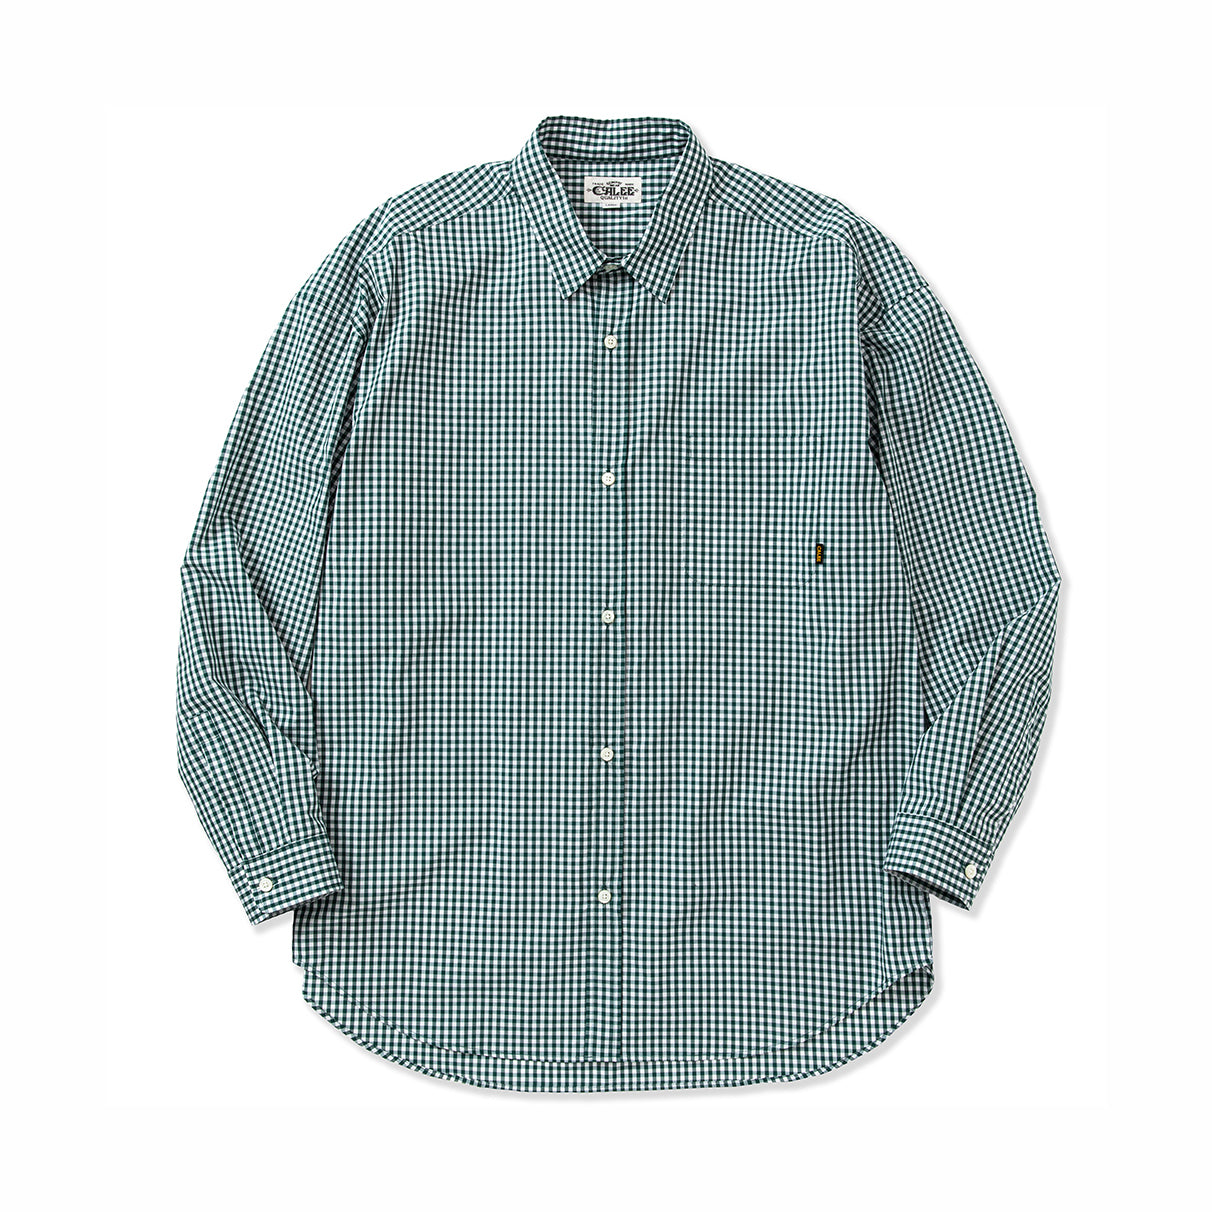 GINGHAM CHECK PATTERN OVER SILHOUETTE L/S SHIRT - calee-official